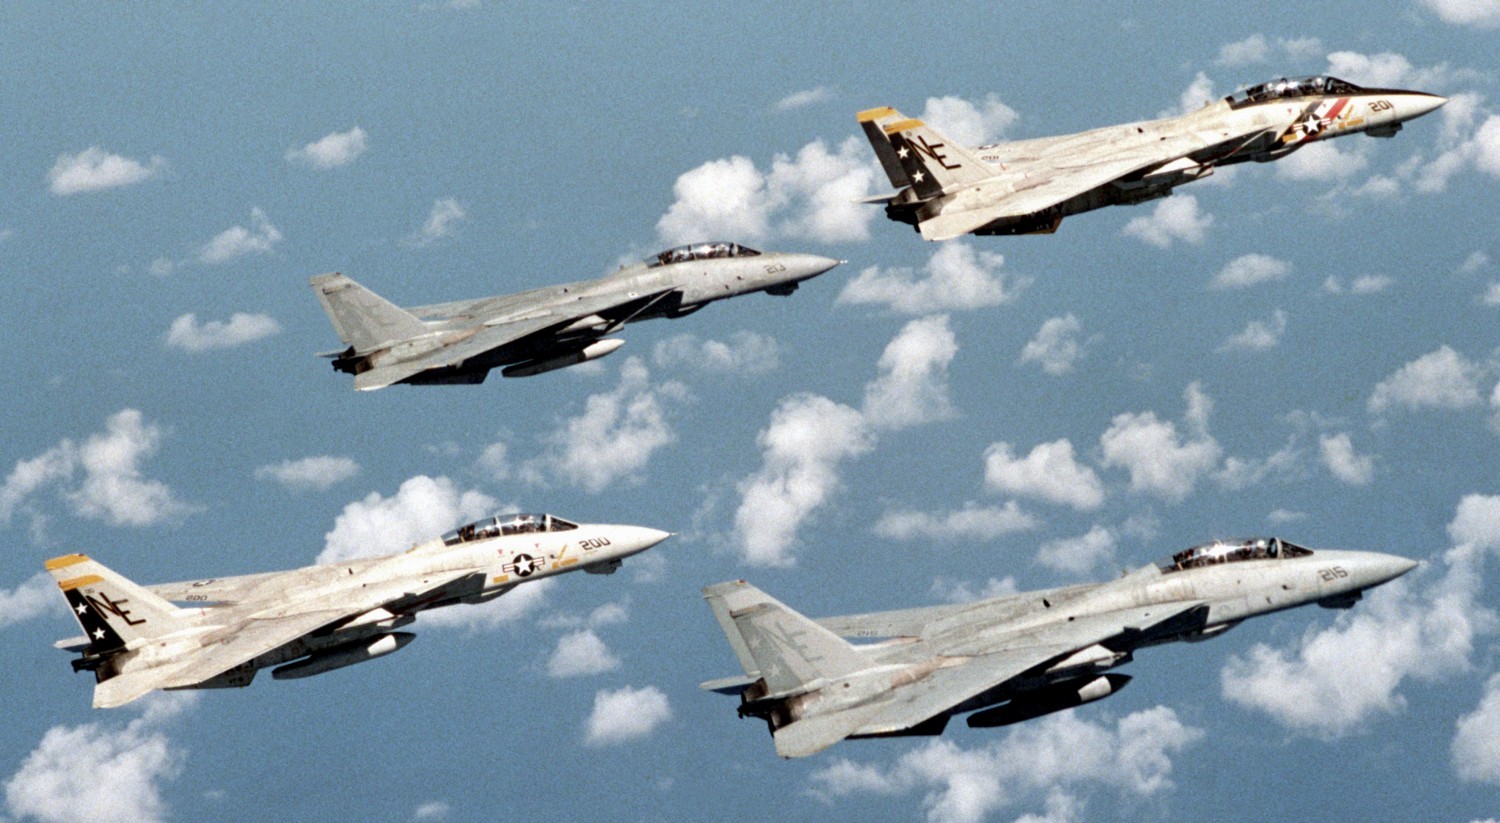 vf-2 bounty hunters fighter squadron fitron f-14a tomcat carrier air wing cvw-2 uss ranger cv-61 84